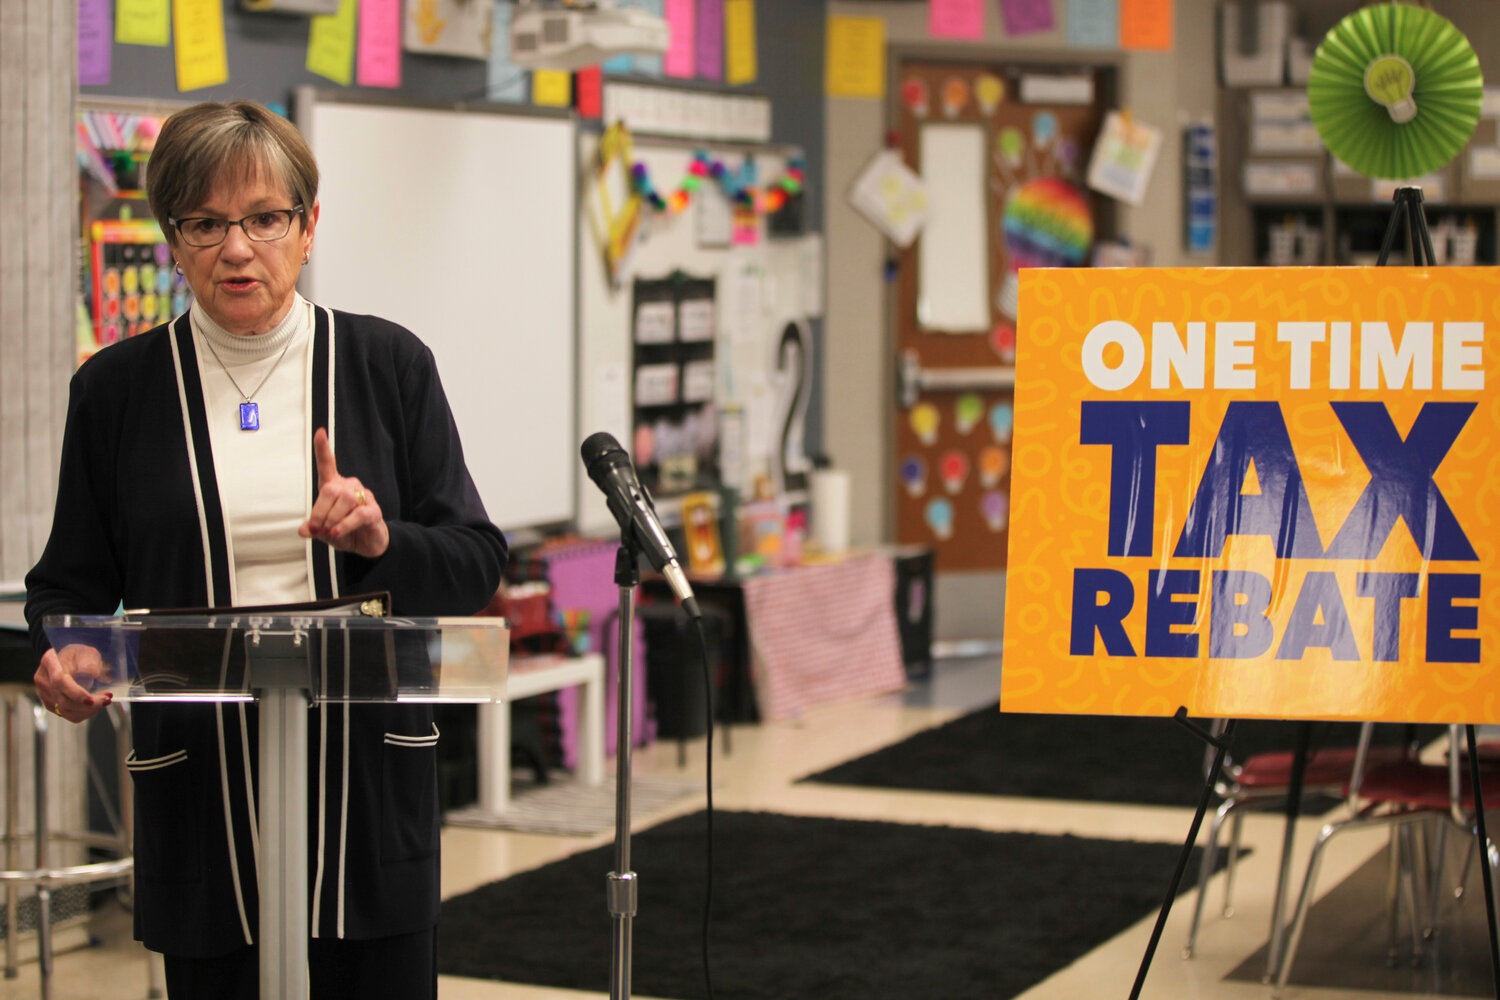 Kansas Gov. Laura Kelly discusses her veto of a bill that would have cut Kansas taxes nearly $1.4 billion over three years at a news conference, Monday, April 24, 2023, in a second-grade classroom at Elmont Elementary School in Topeka, Kan. Kelly objected to a proposal included in the bill that would have imposed a single-rate "flat" income tax for individuals and abandoned the state's current, three-rate tax. (AP Photo/John Hanna)